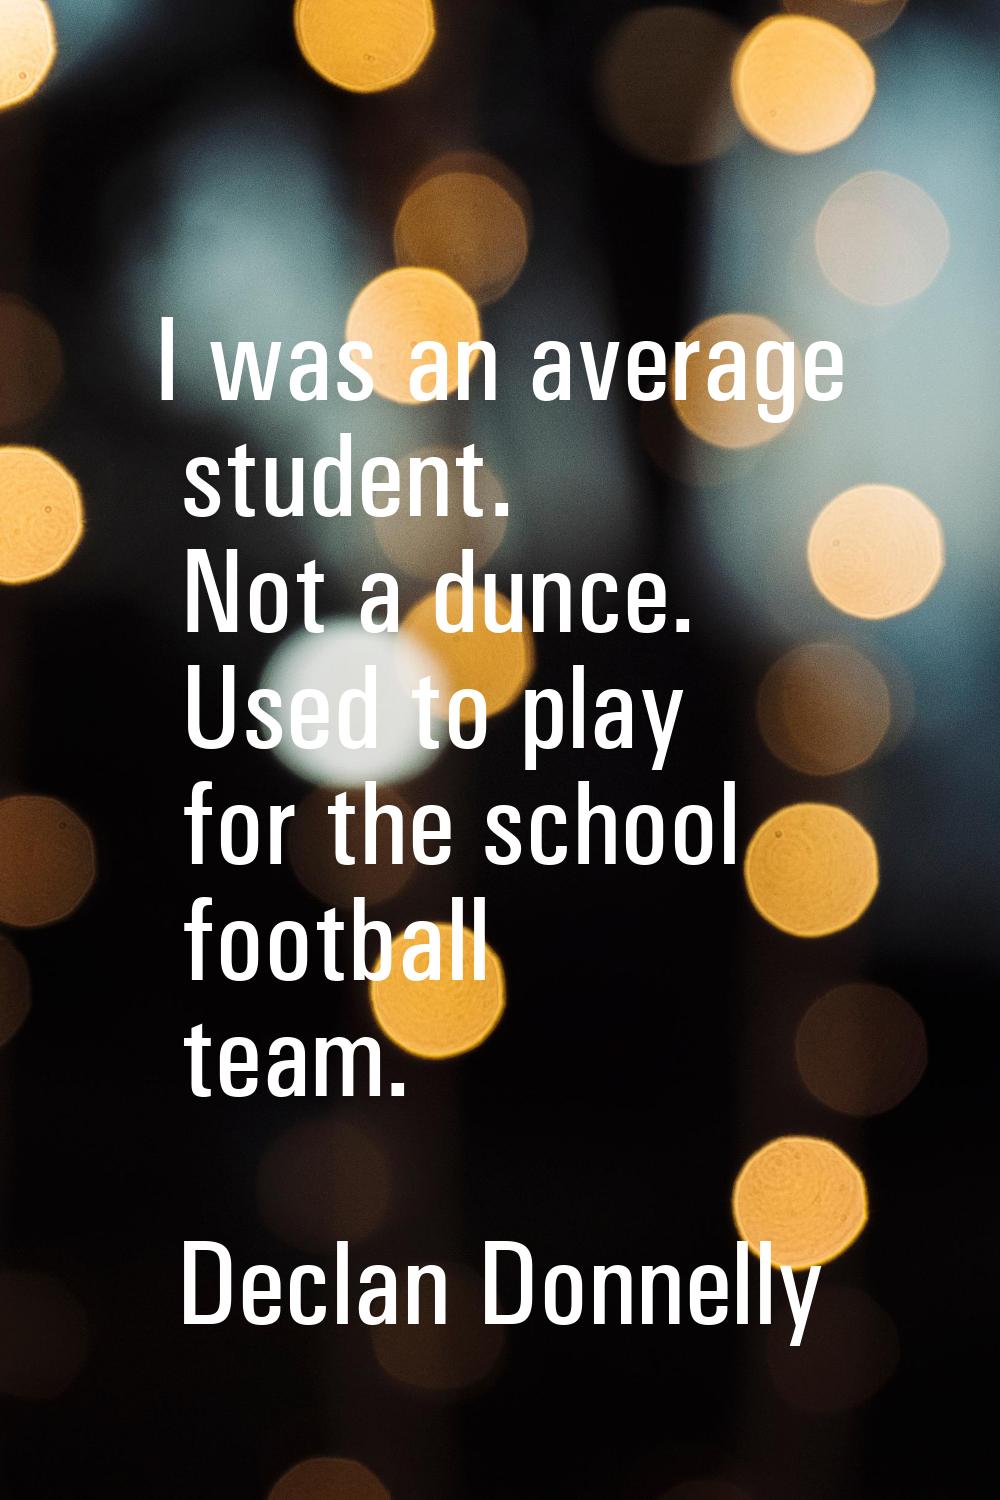 I was an average student. Not a dunce. Used to play for the school football team.